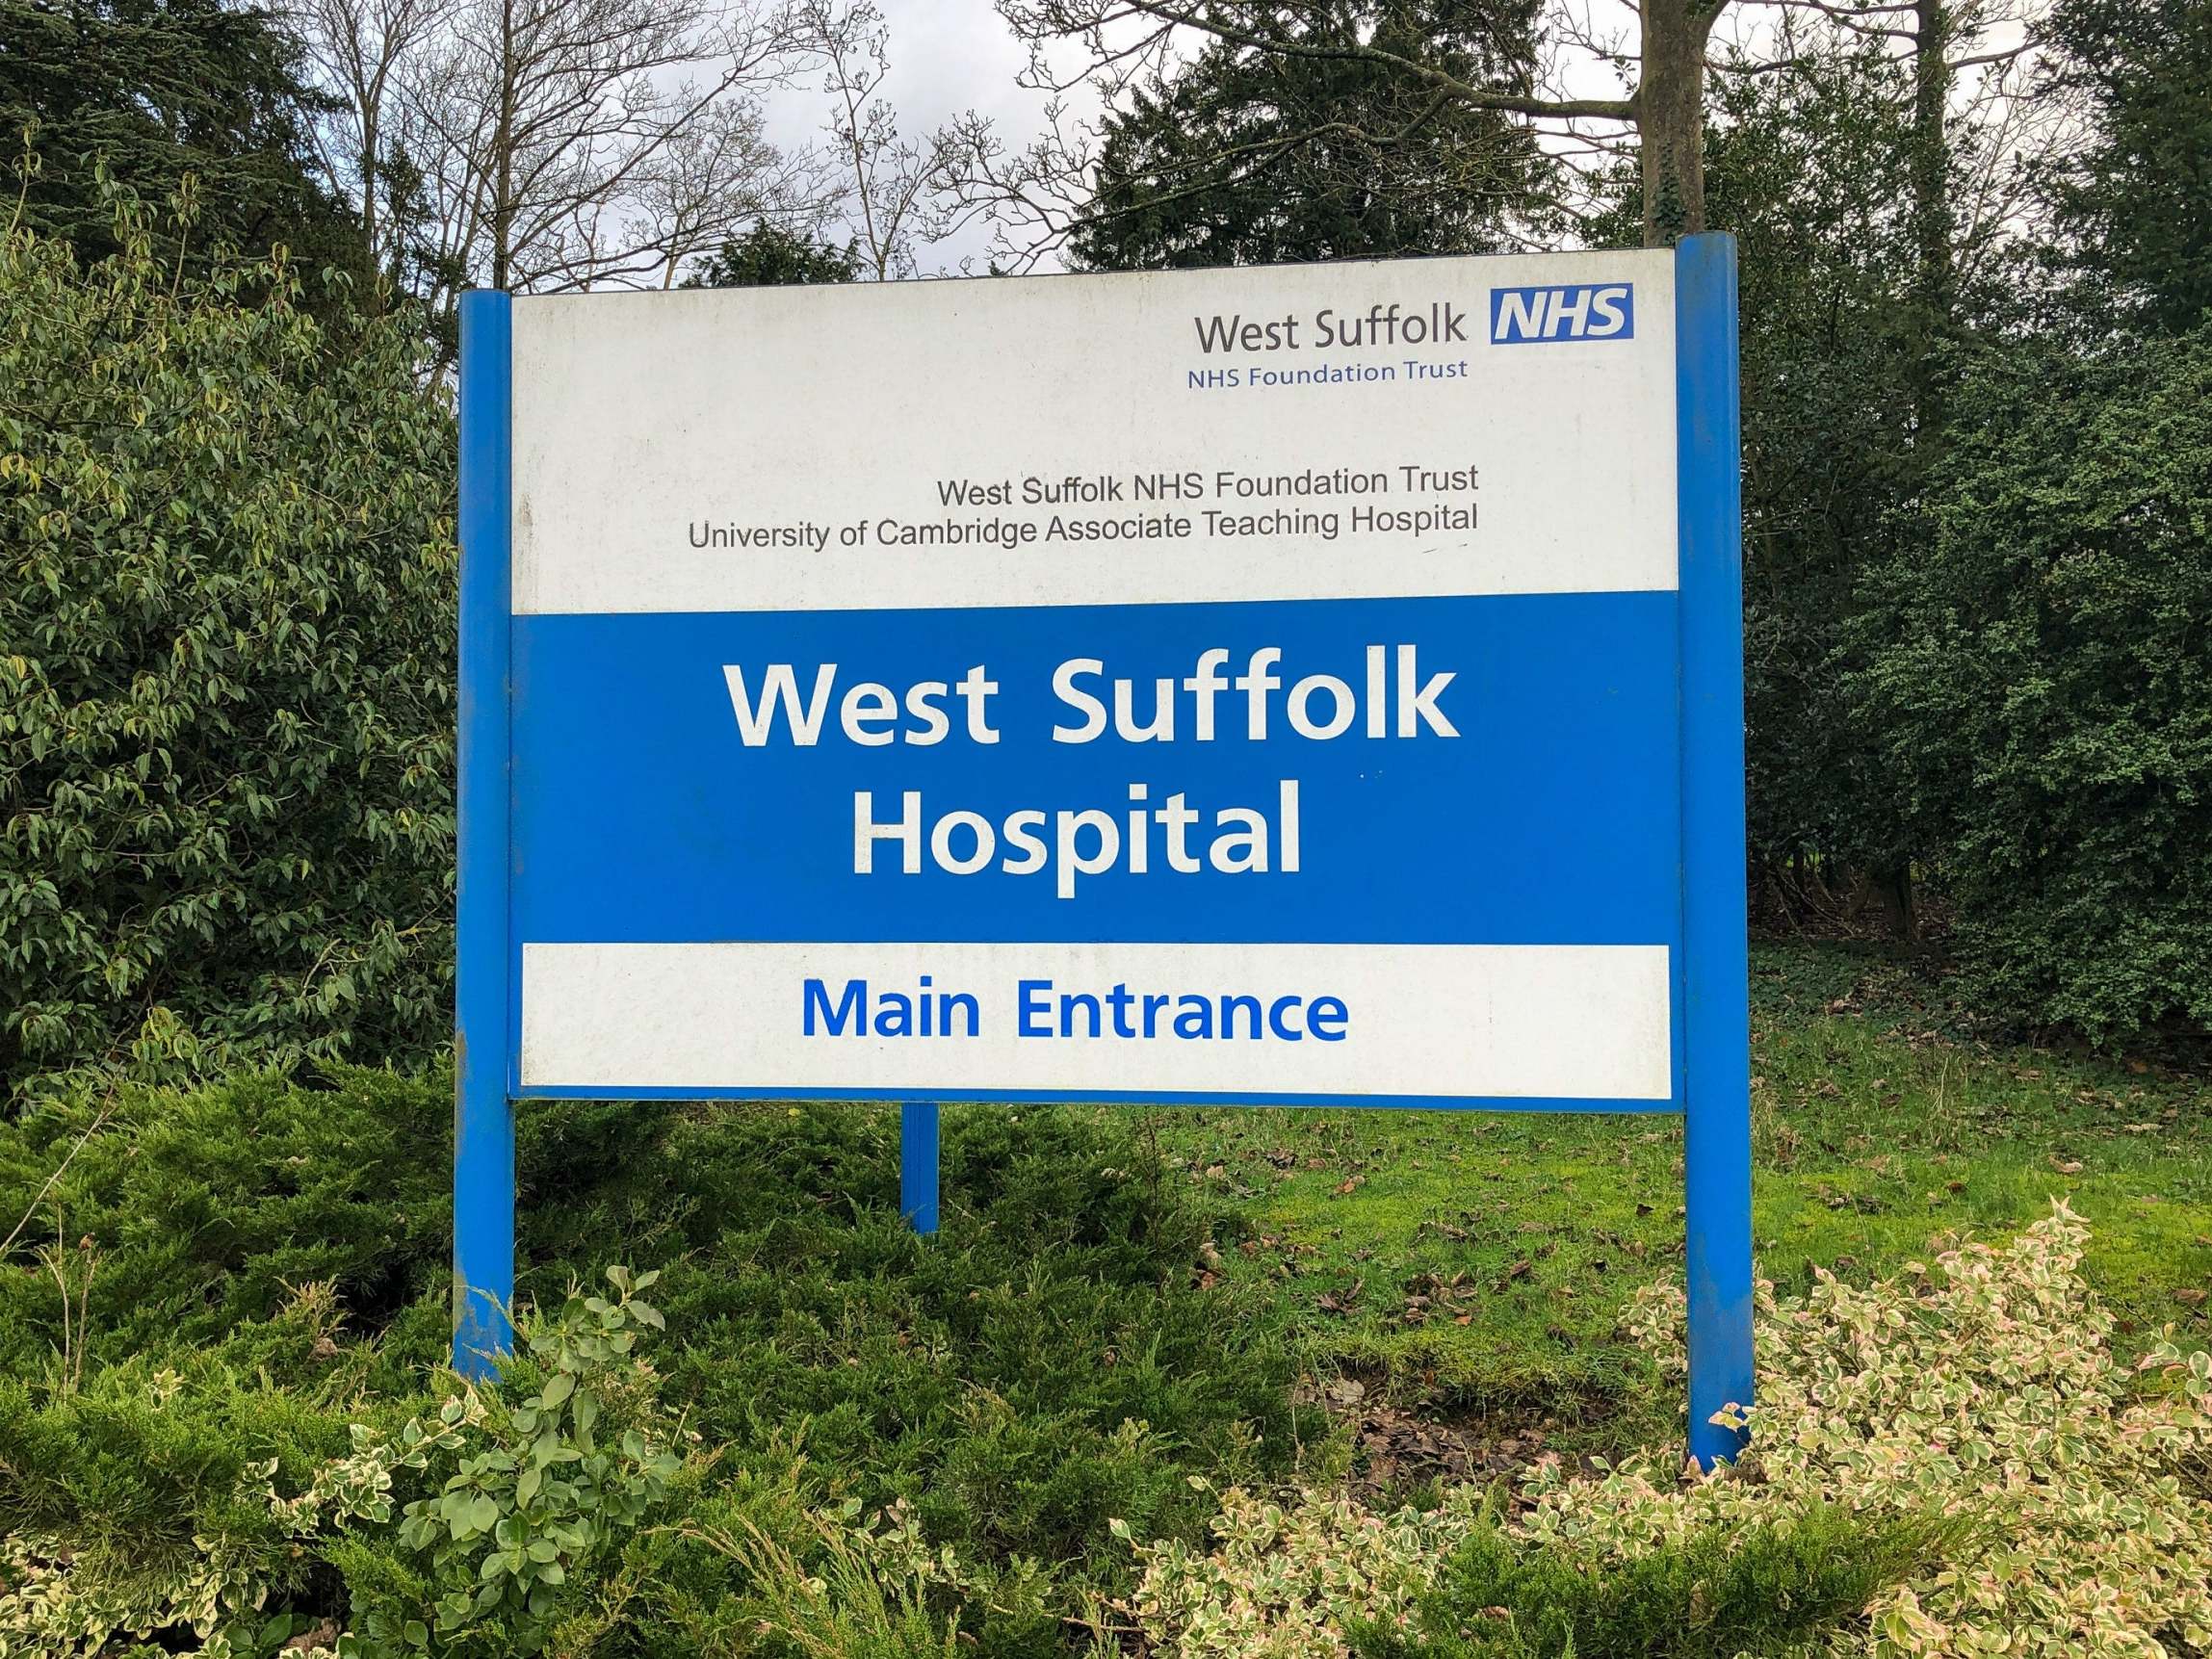 West Suffolk Foundation Trust has been downgraded by the Care Quality Commission